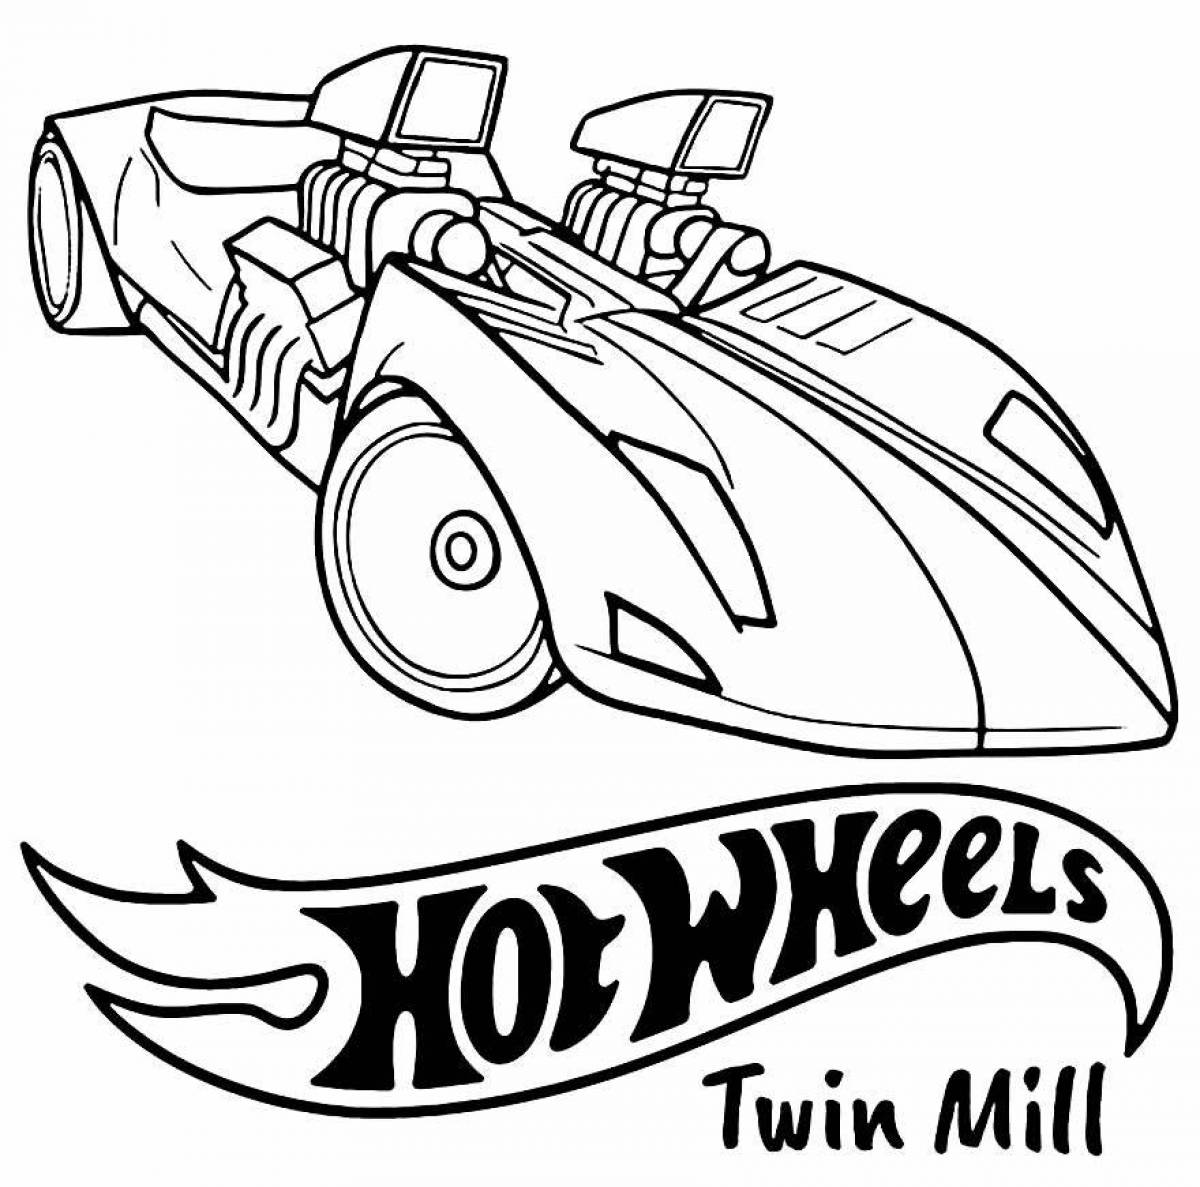 Lovely hot wheels coloring book for kids